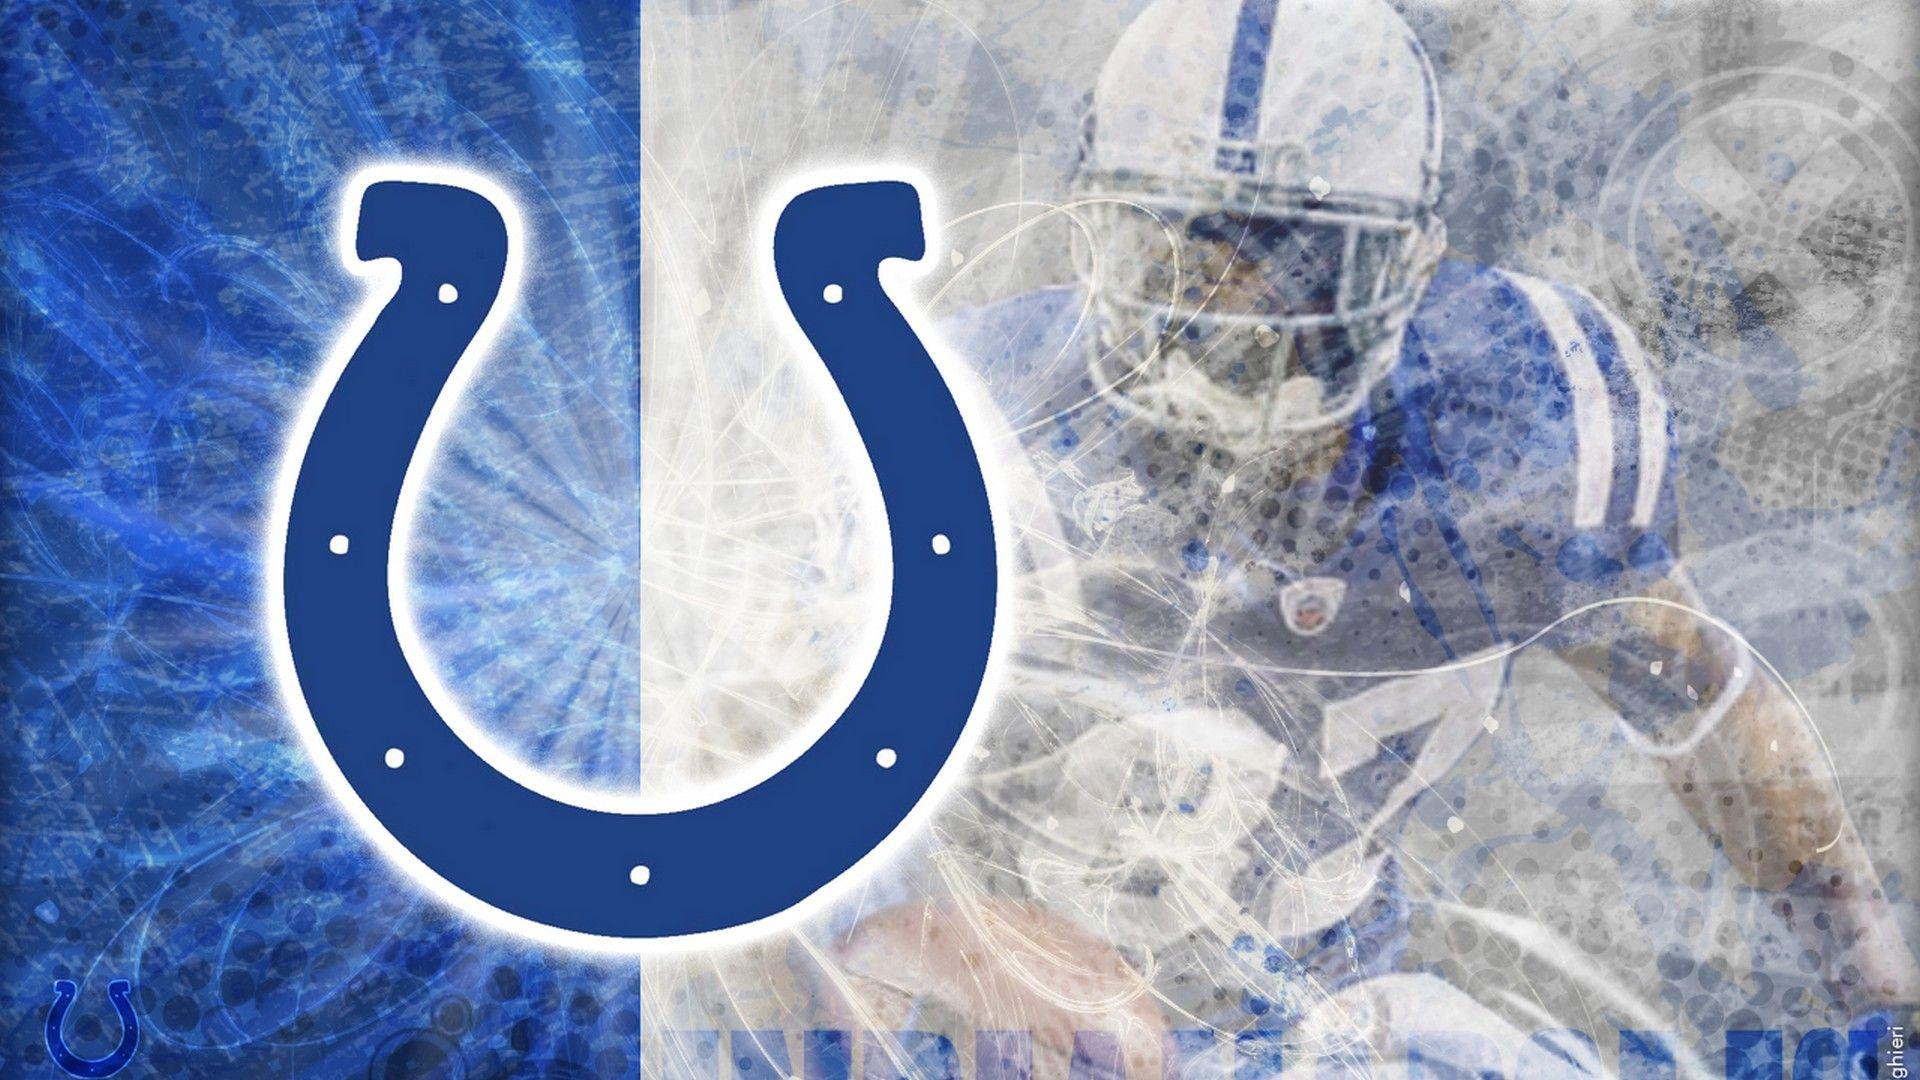 NFL Wallpaper. Indianapolis colts, Indianapolis, Nfl